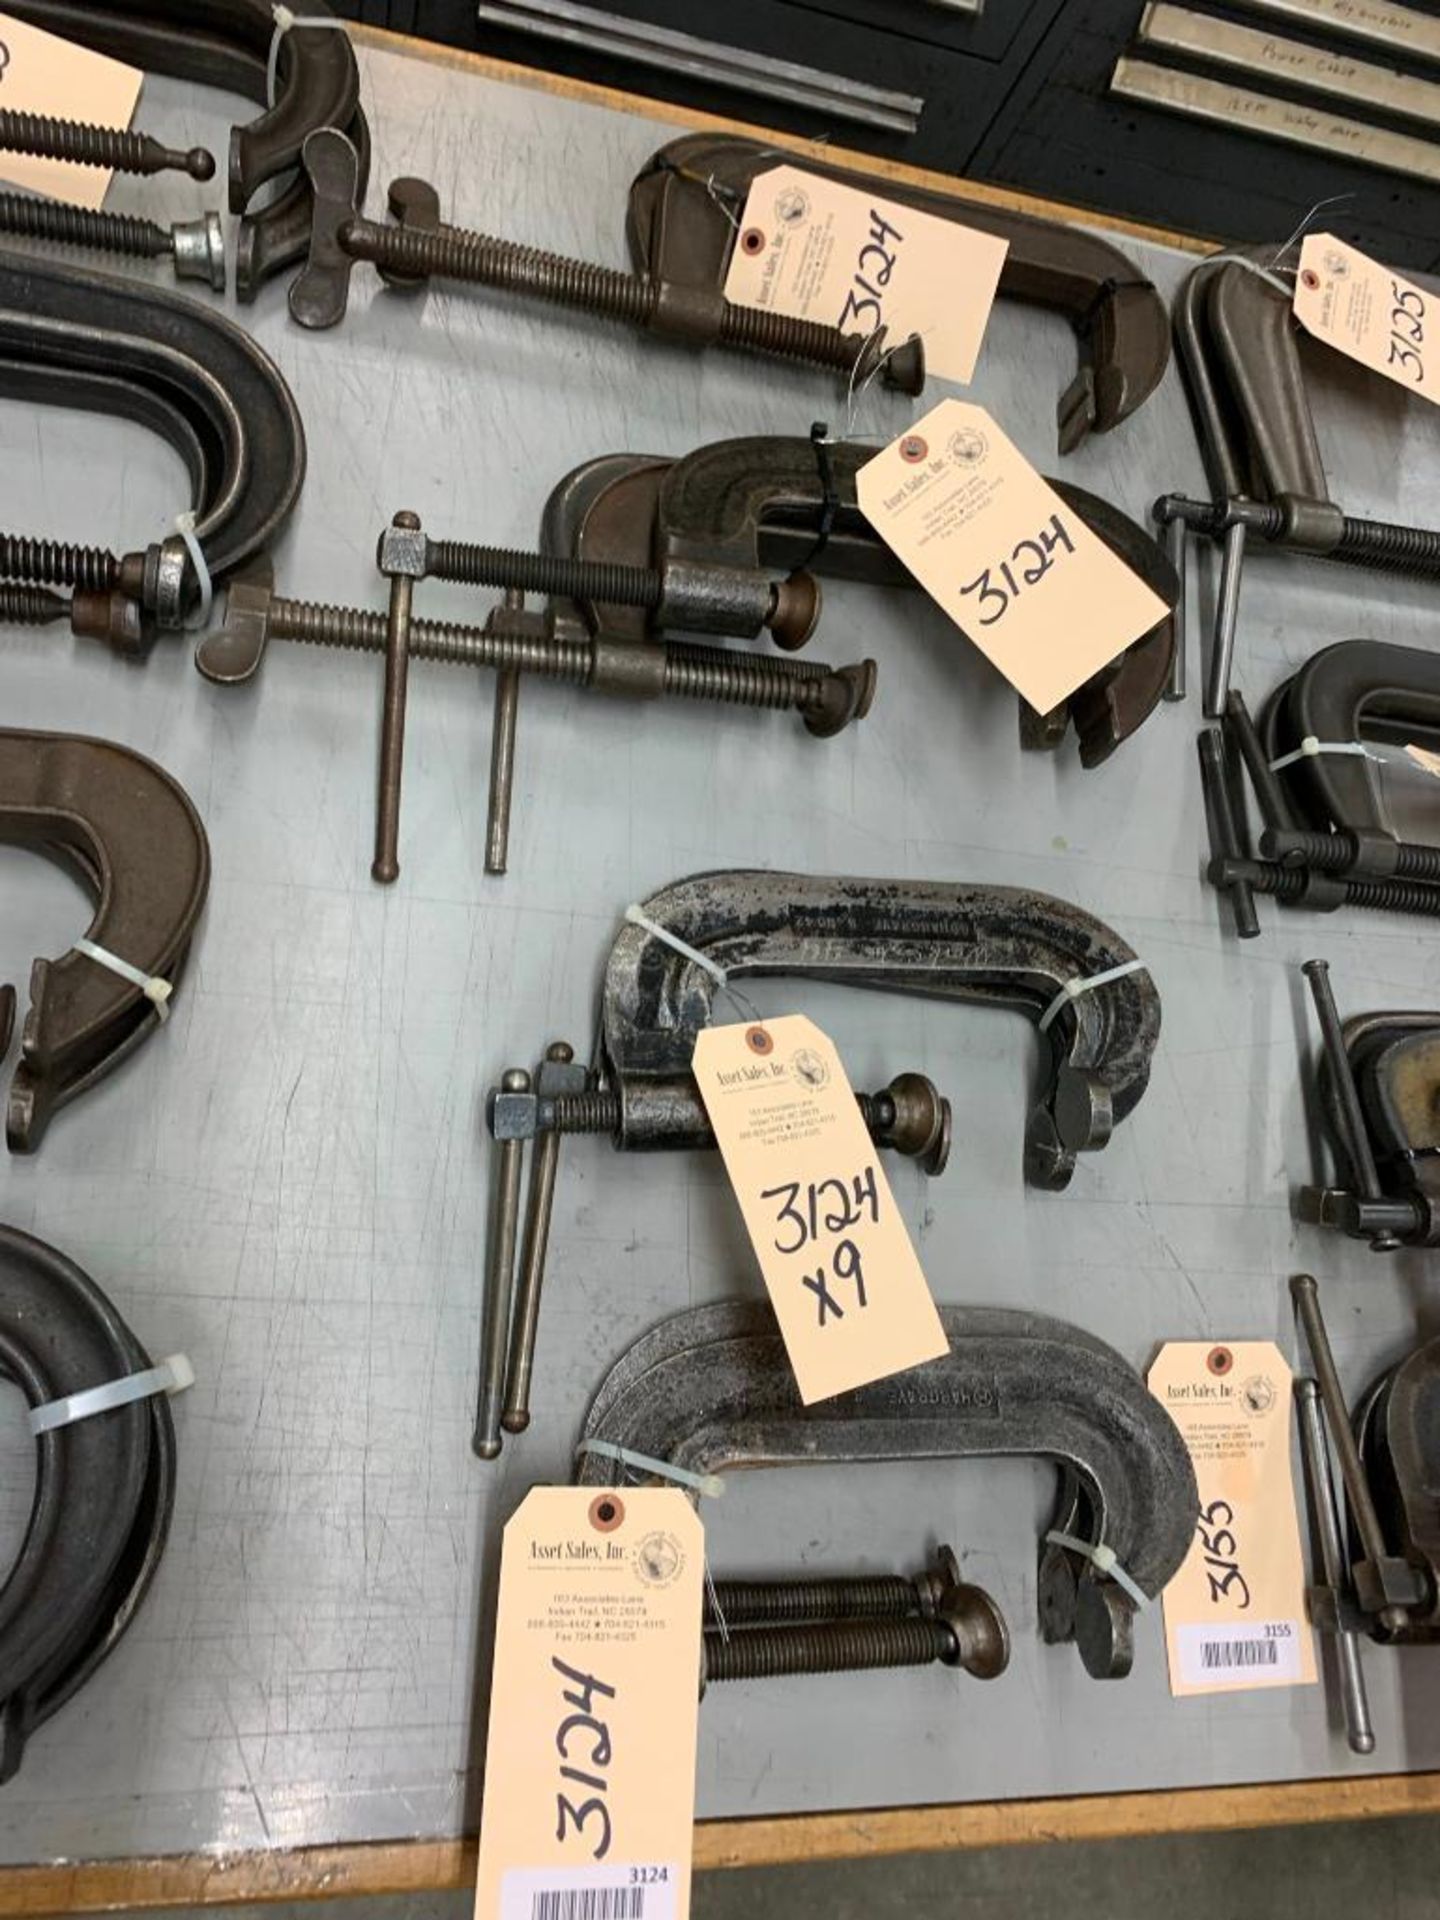 (9) C Clamps